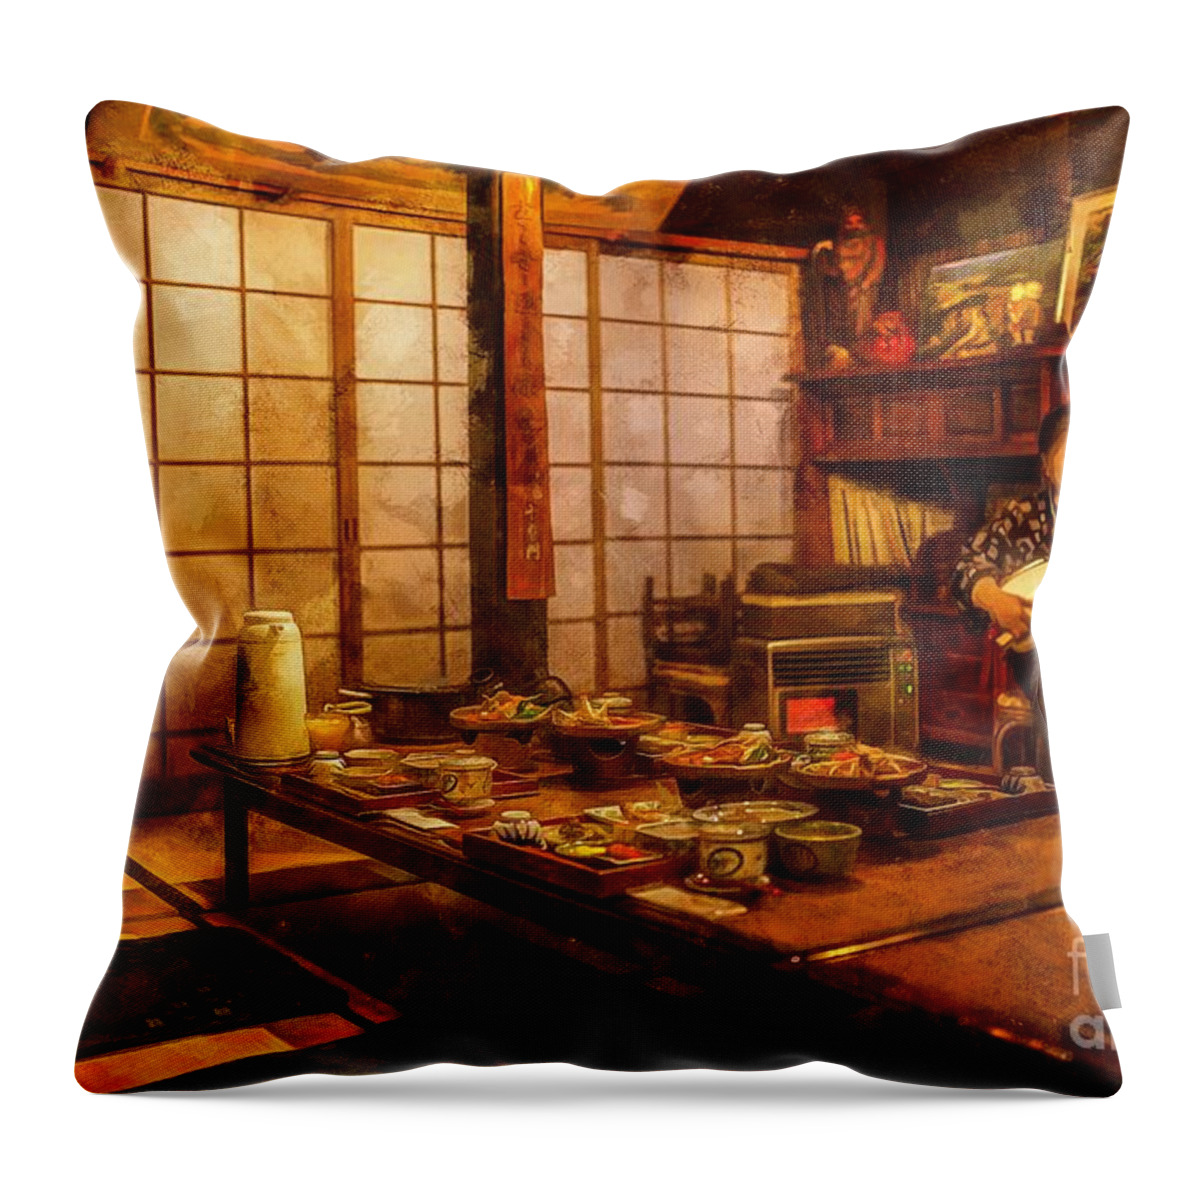 Interior Throw Pillow featuring the digital art Inside an Old Japanese Farm House by Eva Lechner